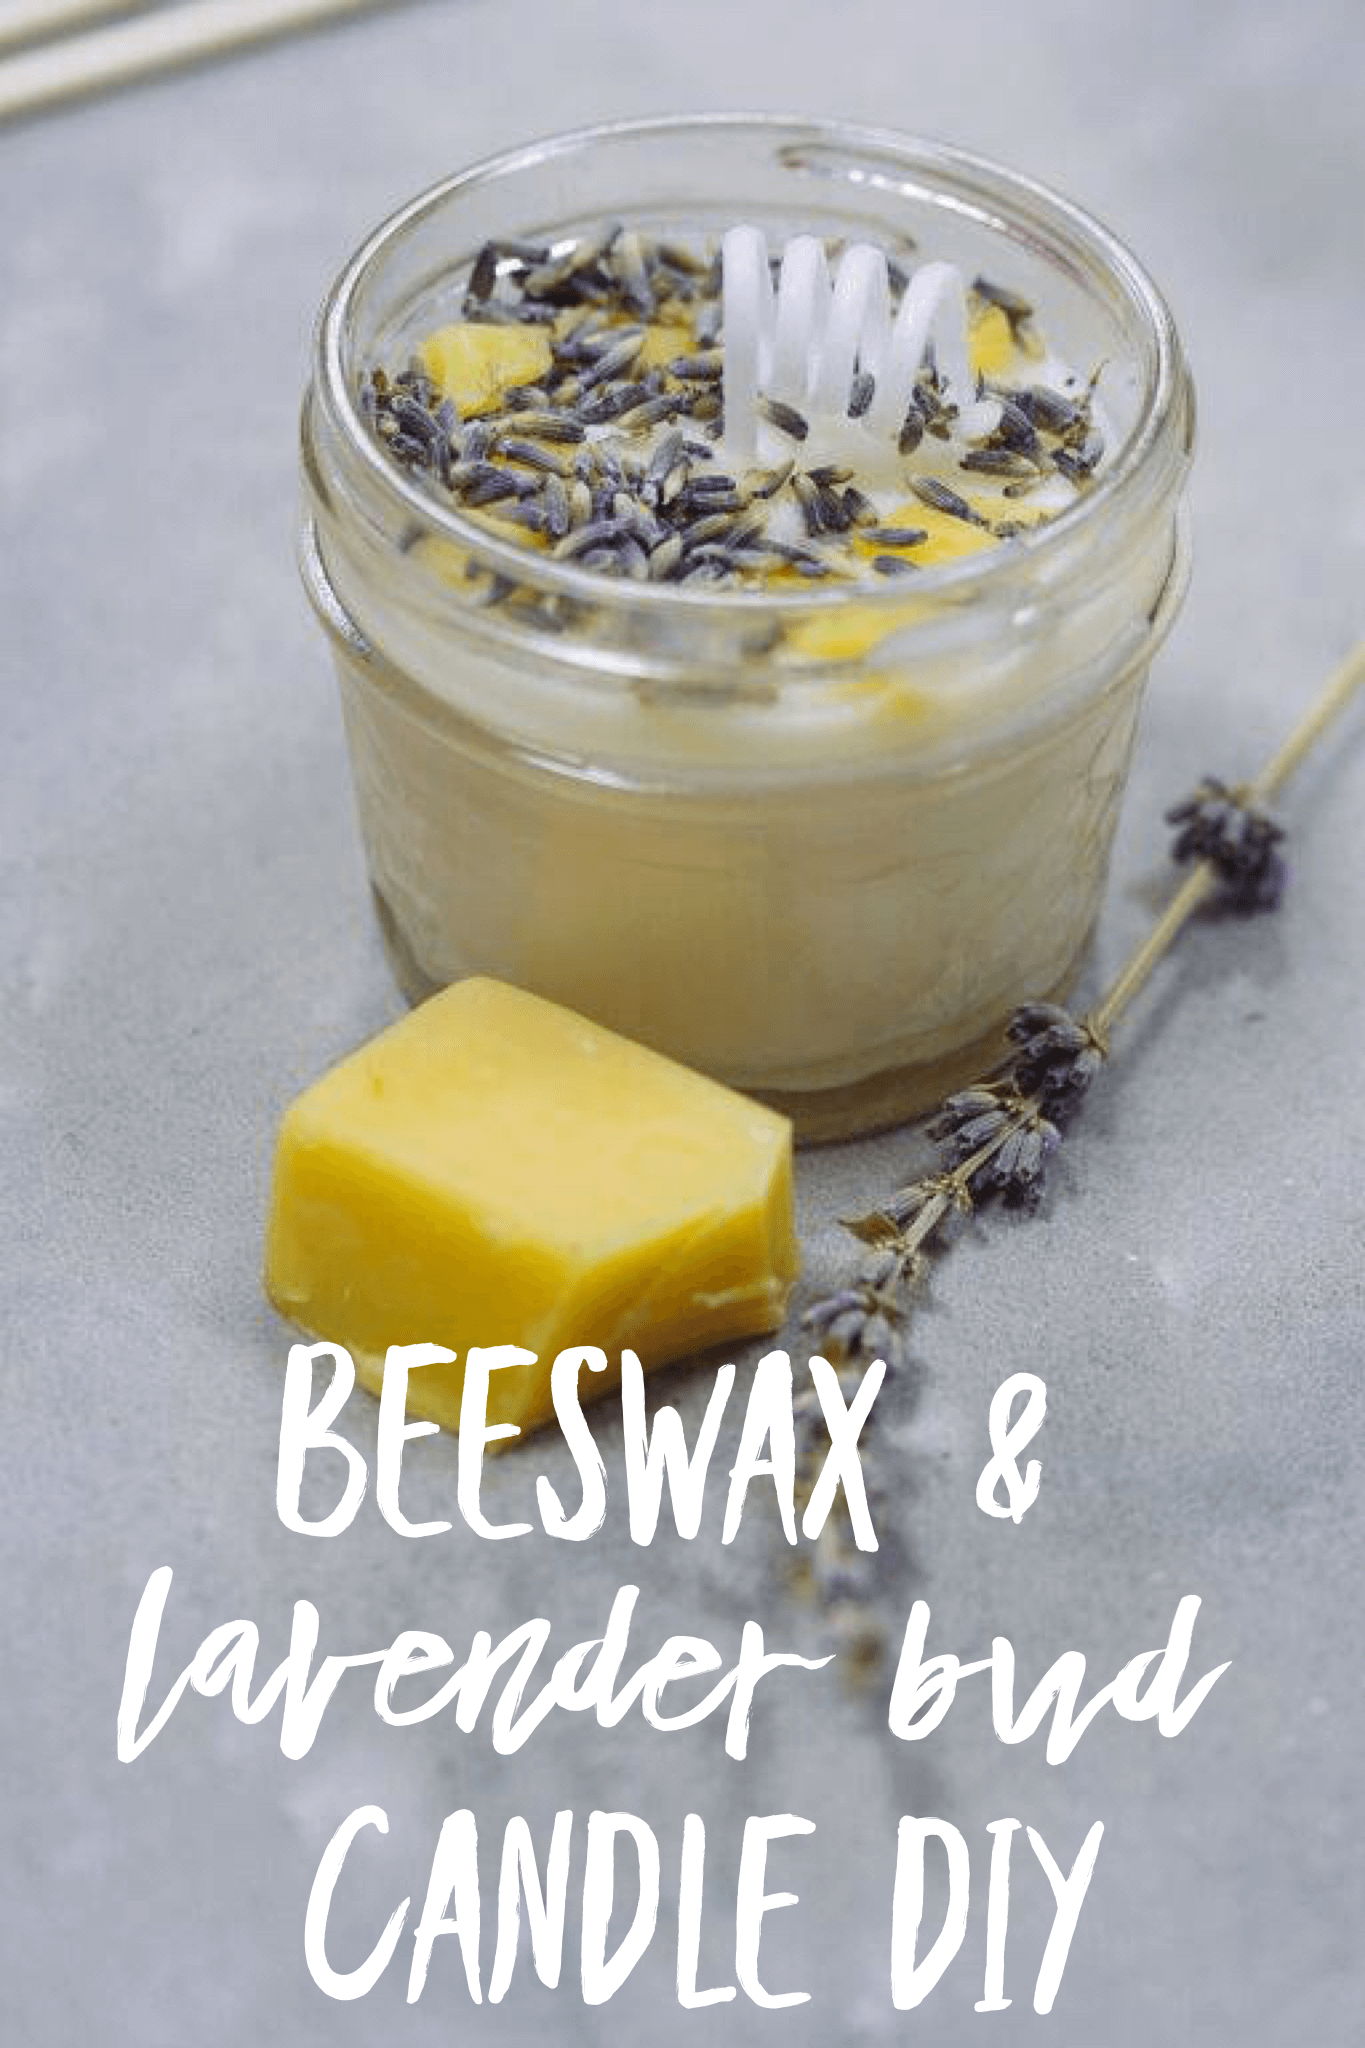 3oz homemade beeswax lavender candle